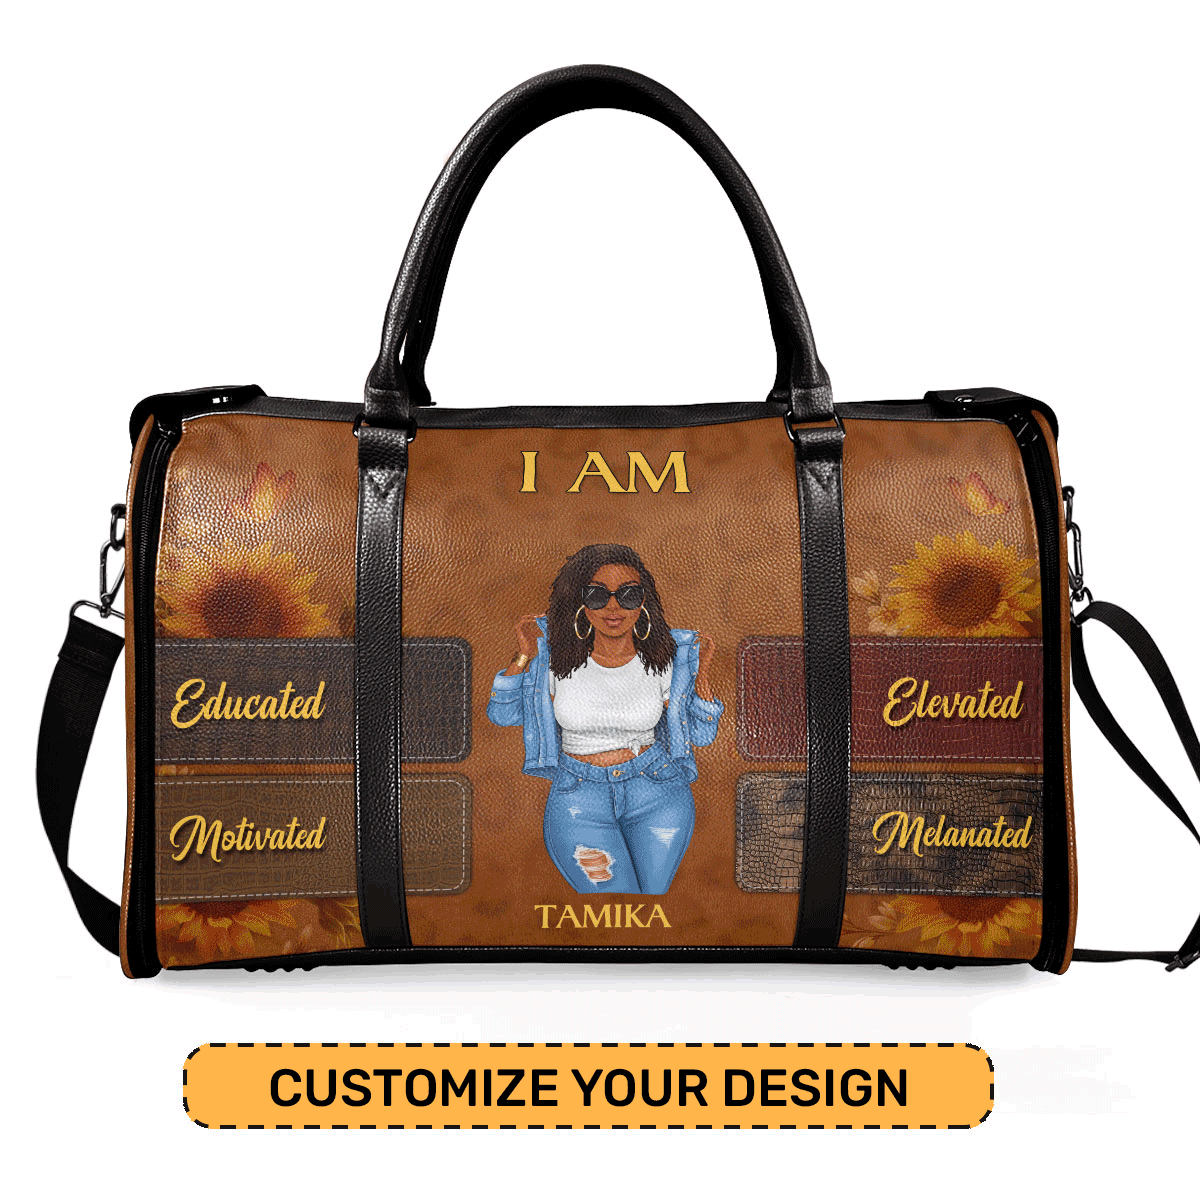 I Am - Personalized Leather Duffle Bag STB03